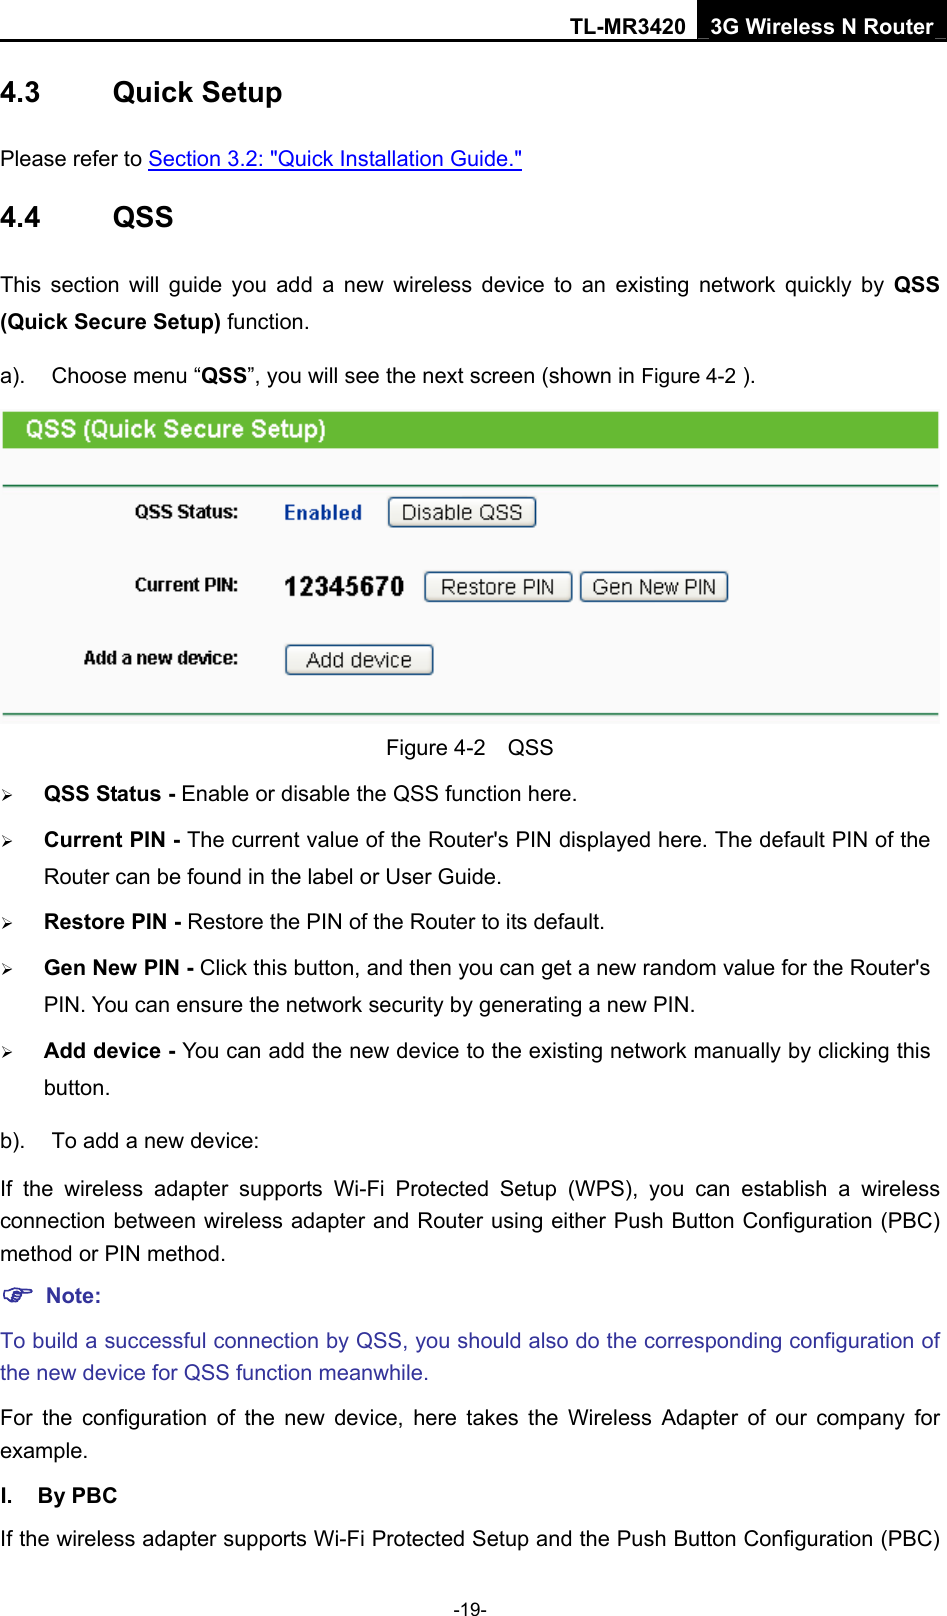 TL-MR3420 3G Wireless N Router -19- 4.3  Quick Setup Please refer to Section 3.2: &quot;Quick Installation Guide.&quot; 4.4  QSS This section will guide you add a new wireless device to an existing network quickly by QSS (Quick Secure Setup) function.   a).  Choose menu “QSS”, you will see the next screen (shown in Figure 4-2 ).  Figure 4-2  QSS ¾ QSS Status - Enable or disable the QSS function here.   ¾ Current PIN - The current value of the Router&apos;s PIN displayed here. The default PIN of the Router can be found in the label or User Guide.   ¾ Restore PIN - Restore the PIN of the Router to its default.   ¾ Gen New PIN - Click this button, and then you can get a new random value for the Router&apos;s PIN. You can ensure the network security by generating a new PIN.   ¾ Add device - You can add the new device to the existing network manually by clicking this button.  b).  To add a new device: If the wireless adapter supports Wi-Fi Protected Setup (WPS), you can establish a wireless connection between wireless adapter and Router using either Push Button Configuration (PBC) method or PIN method. ) Note: To build a successful connection by QSS, you should also do the corresponding configuration of the new device for QSS function meanwhile. For the configuration of the new device, here takes the Wireless Adapter of our company for example. I. By PBC If the wireless adapter supports Wi-Fi Protected Setup and the Push Button Configuration (PBC) 